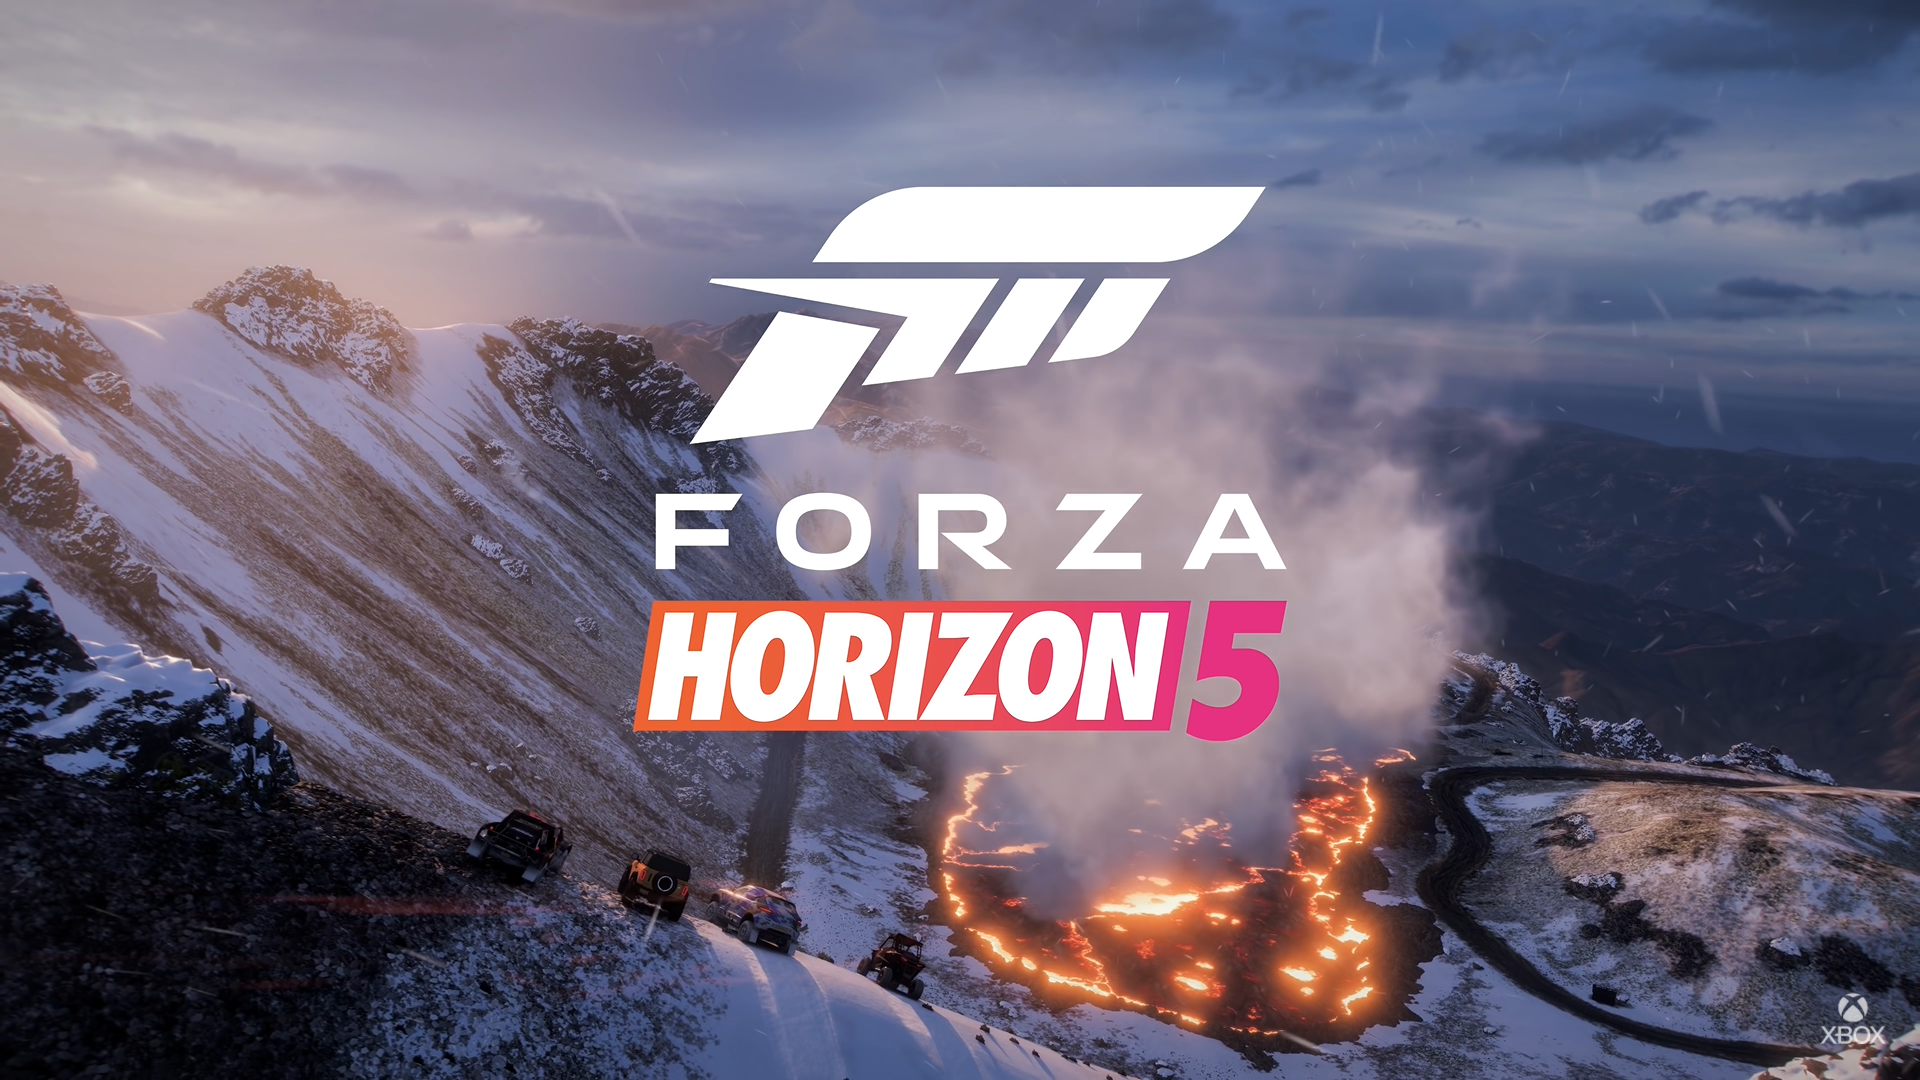 Image for Forza Horizon 5 official launch trailer